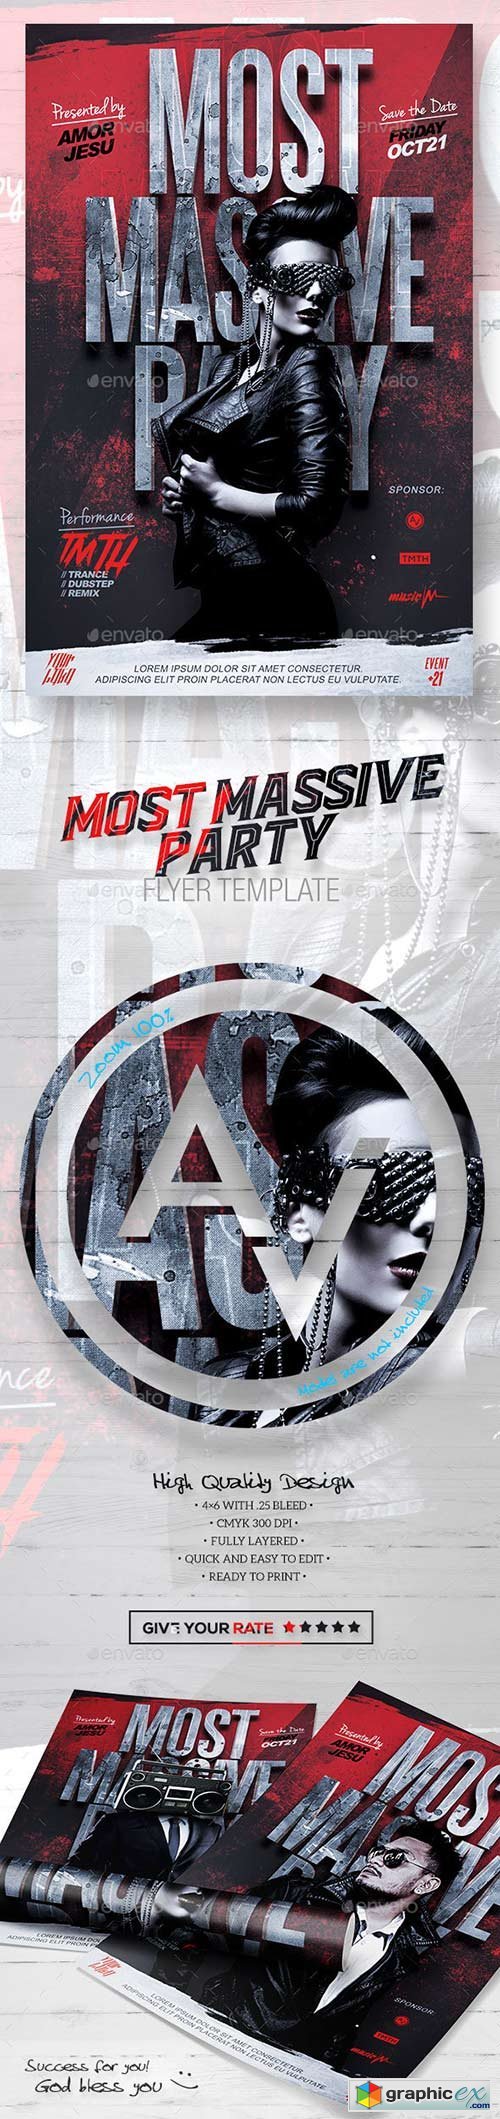 Most Massive Party Flyer Template